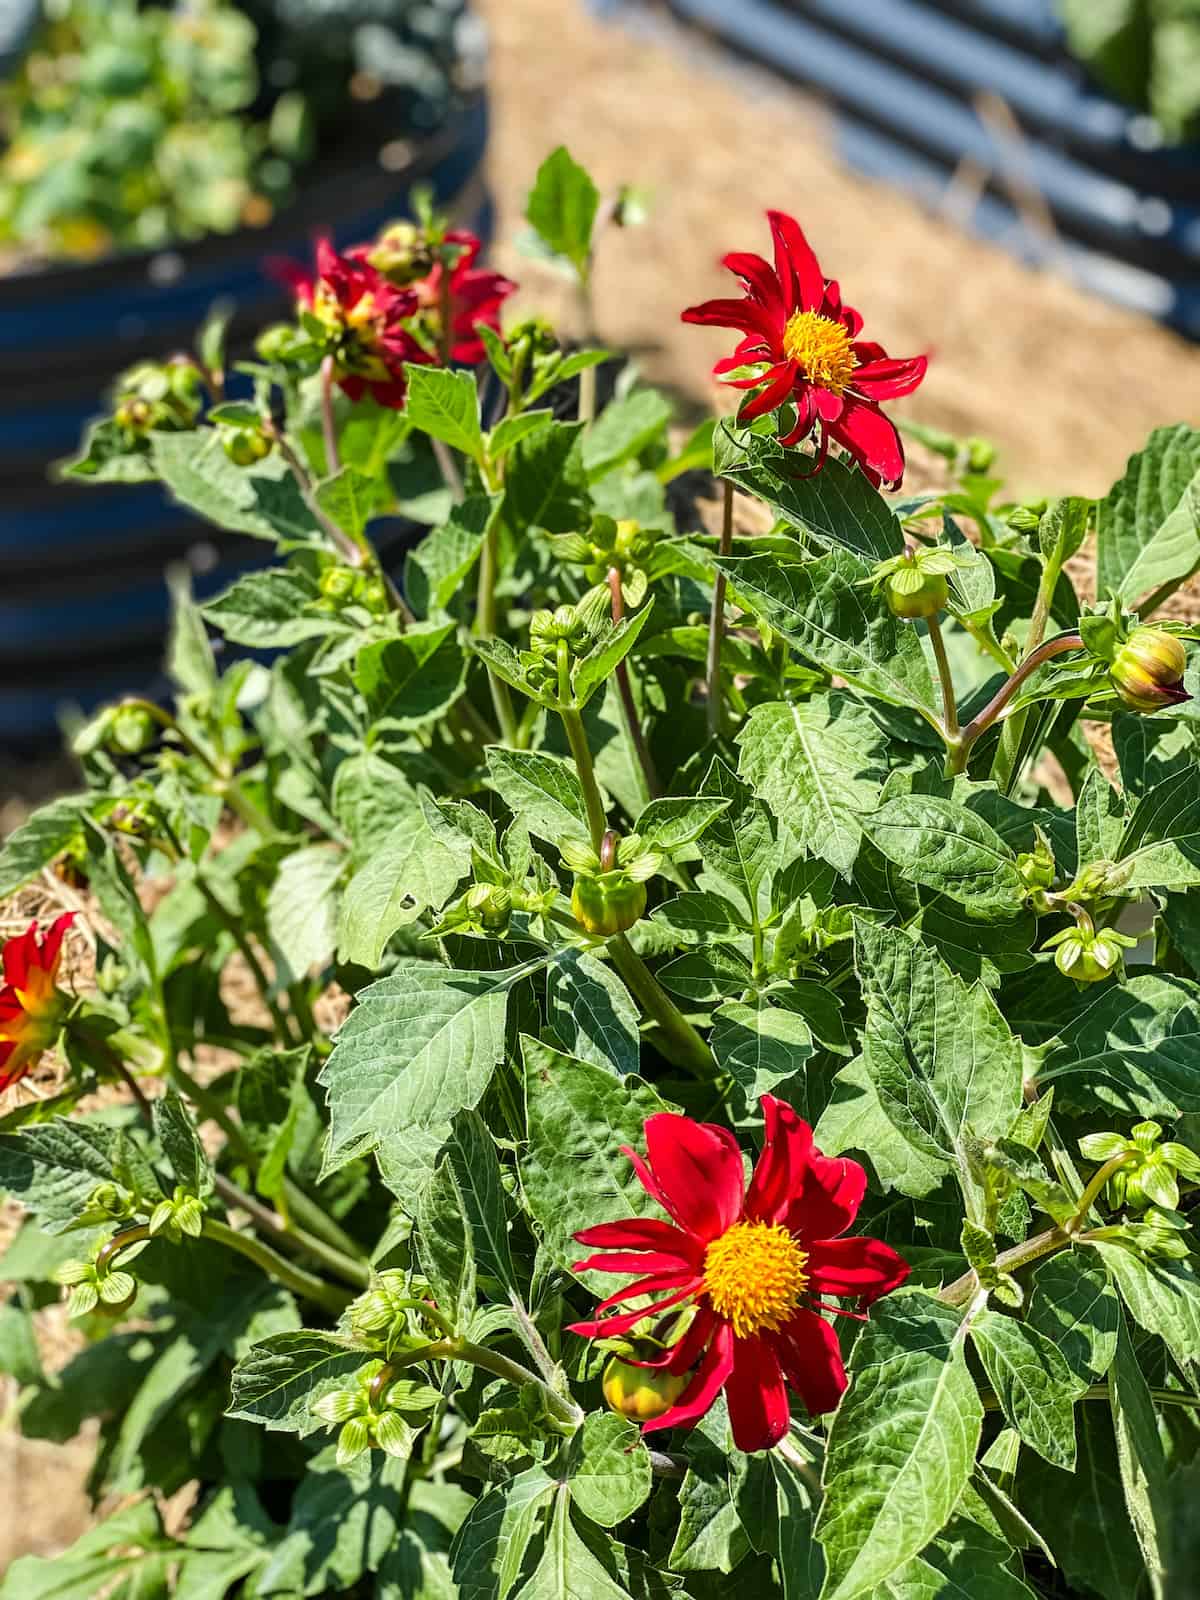 red dahlia flowers in a raised bed garden.